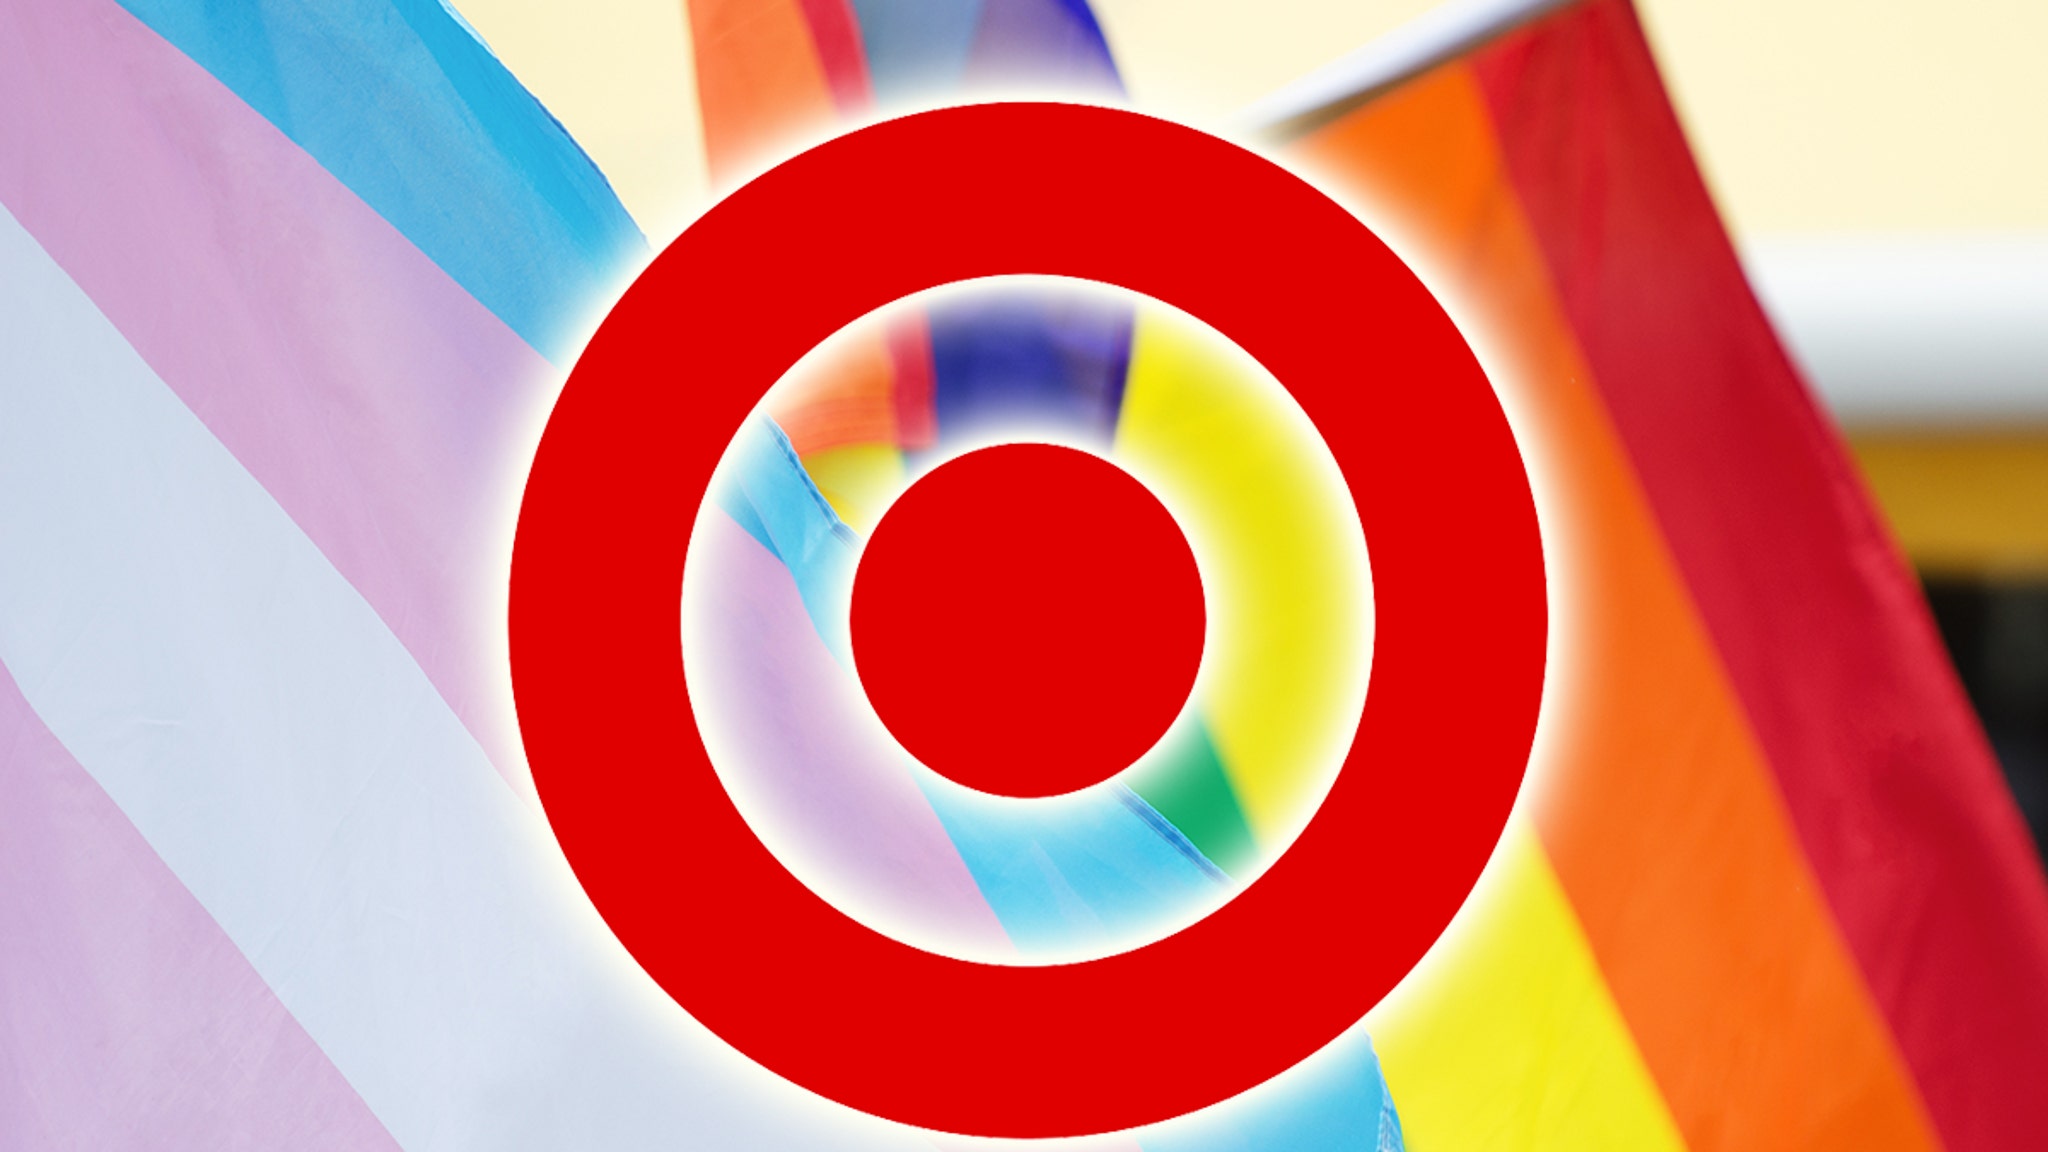 Target Pride Brand Says Collection Pulled After Threats From ‘Domestic Terrorists’